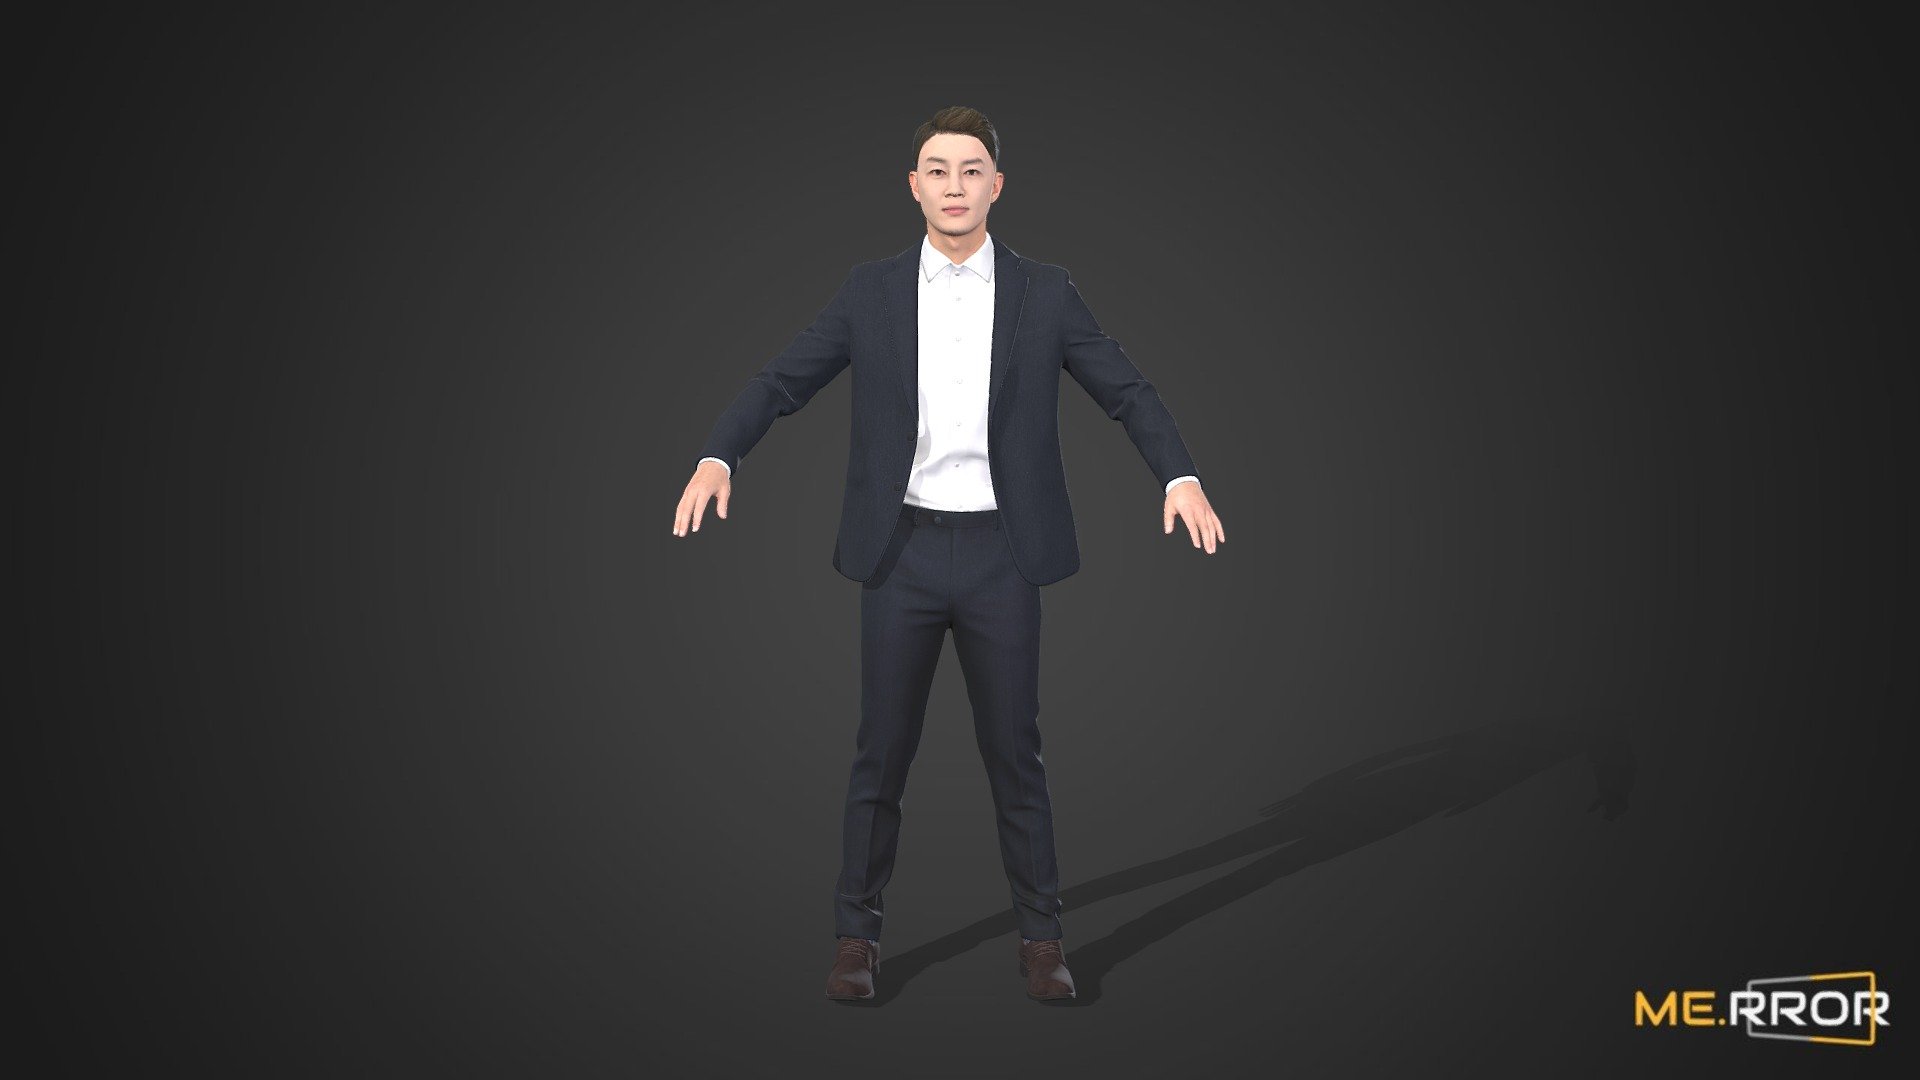 ME.RROR


From 3D models of Asian individuals to a fresh selection of free assets available each month - explore a richer diversity of photorealistic 3D assets at the ME.RROR asset store!

https://me-rror.com/store




[Model Info]




Model Formats : FBX, MAX

Texture Maps (8K) : Diffuse, Normal

Texture Maps (4K) : Hair Diffuse, Alpha

If you encounter any problems using this model, please feel free to contact us. We'd be glad to help you.



[About ME.RROR]

Step into the future with ME.RROR, South Korea's leading 3D specialist. Bespoke creations are not just possible; they are our specialty.

Service areas:




3D scanning

3D modeling

Virtual human creation

Inquiries: https://merror.channel.io/lounge - [Game-ready] Asian Man Scan A-Posed2 - Buy Royalty Free 3D model by ME.RROR Studio (@merror) 3d model